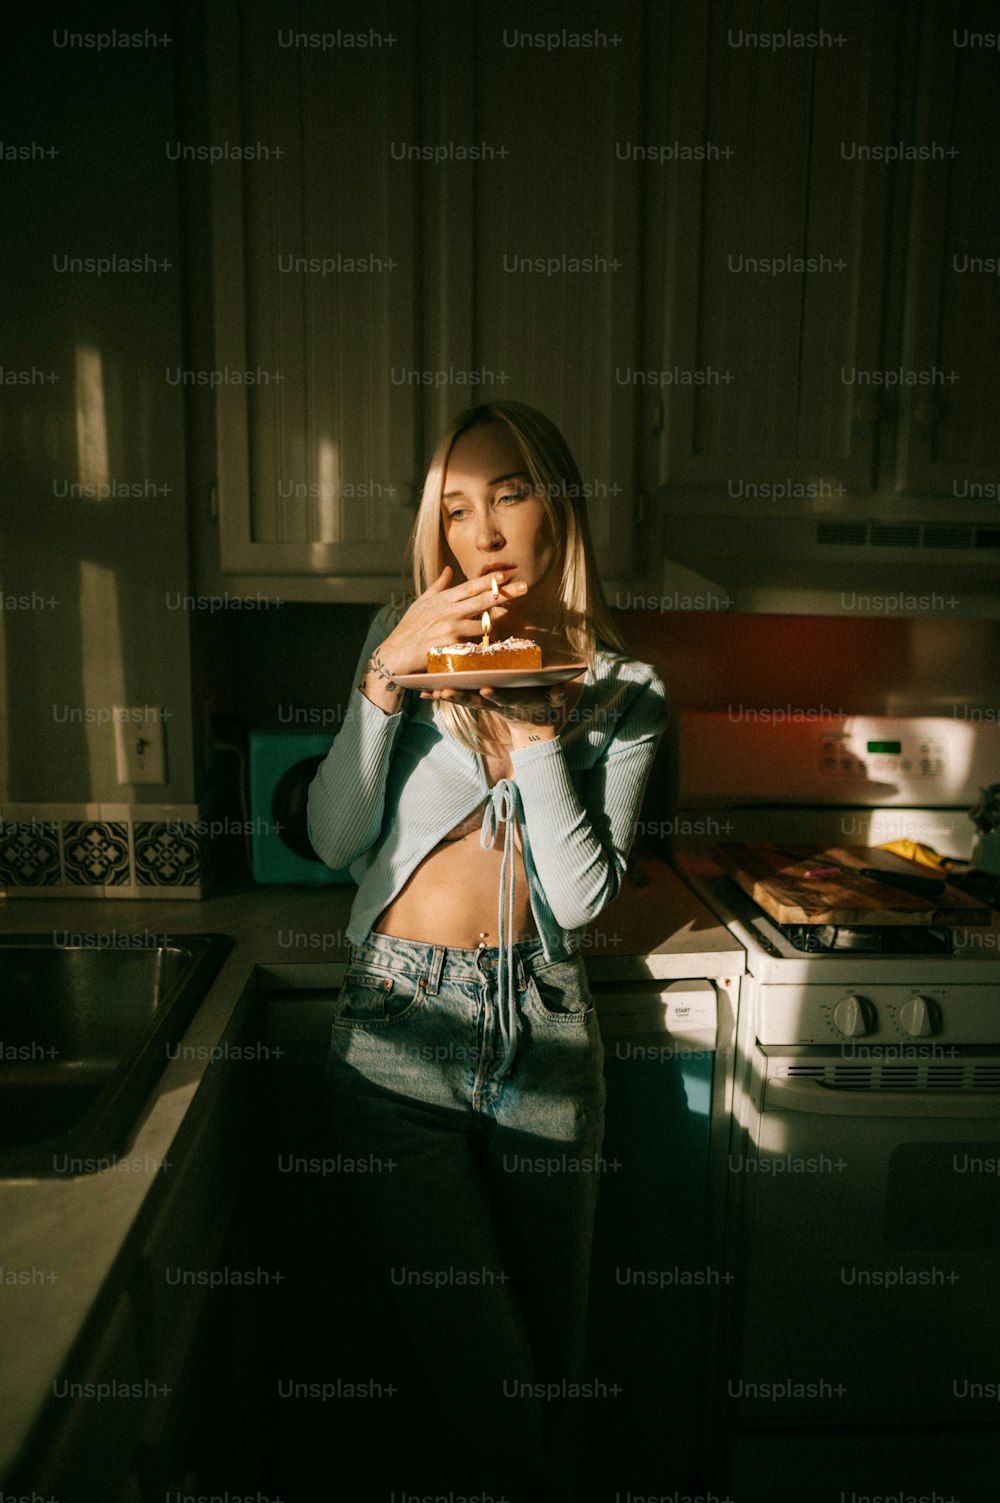 a woman standing in a kitchen holding a pizza